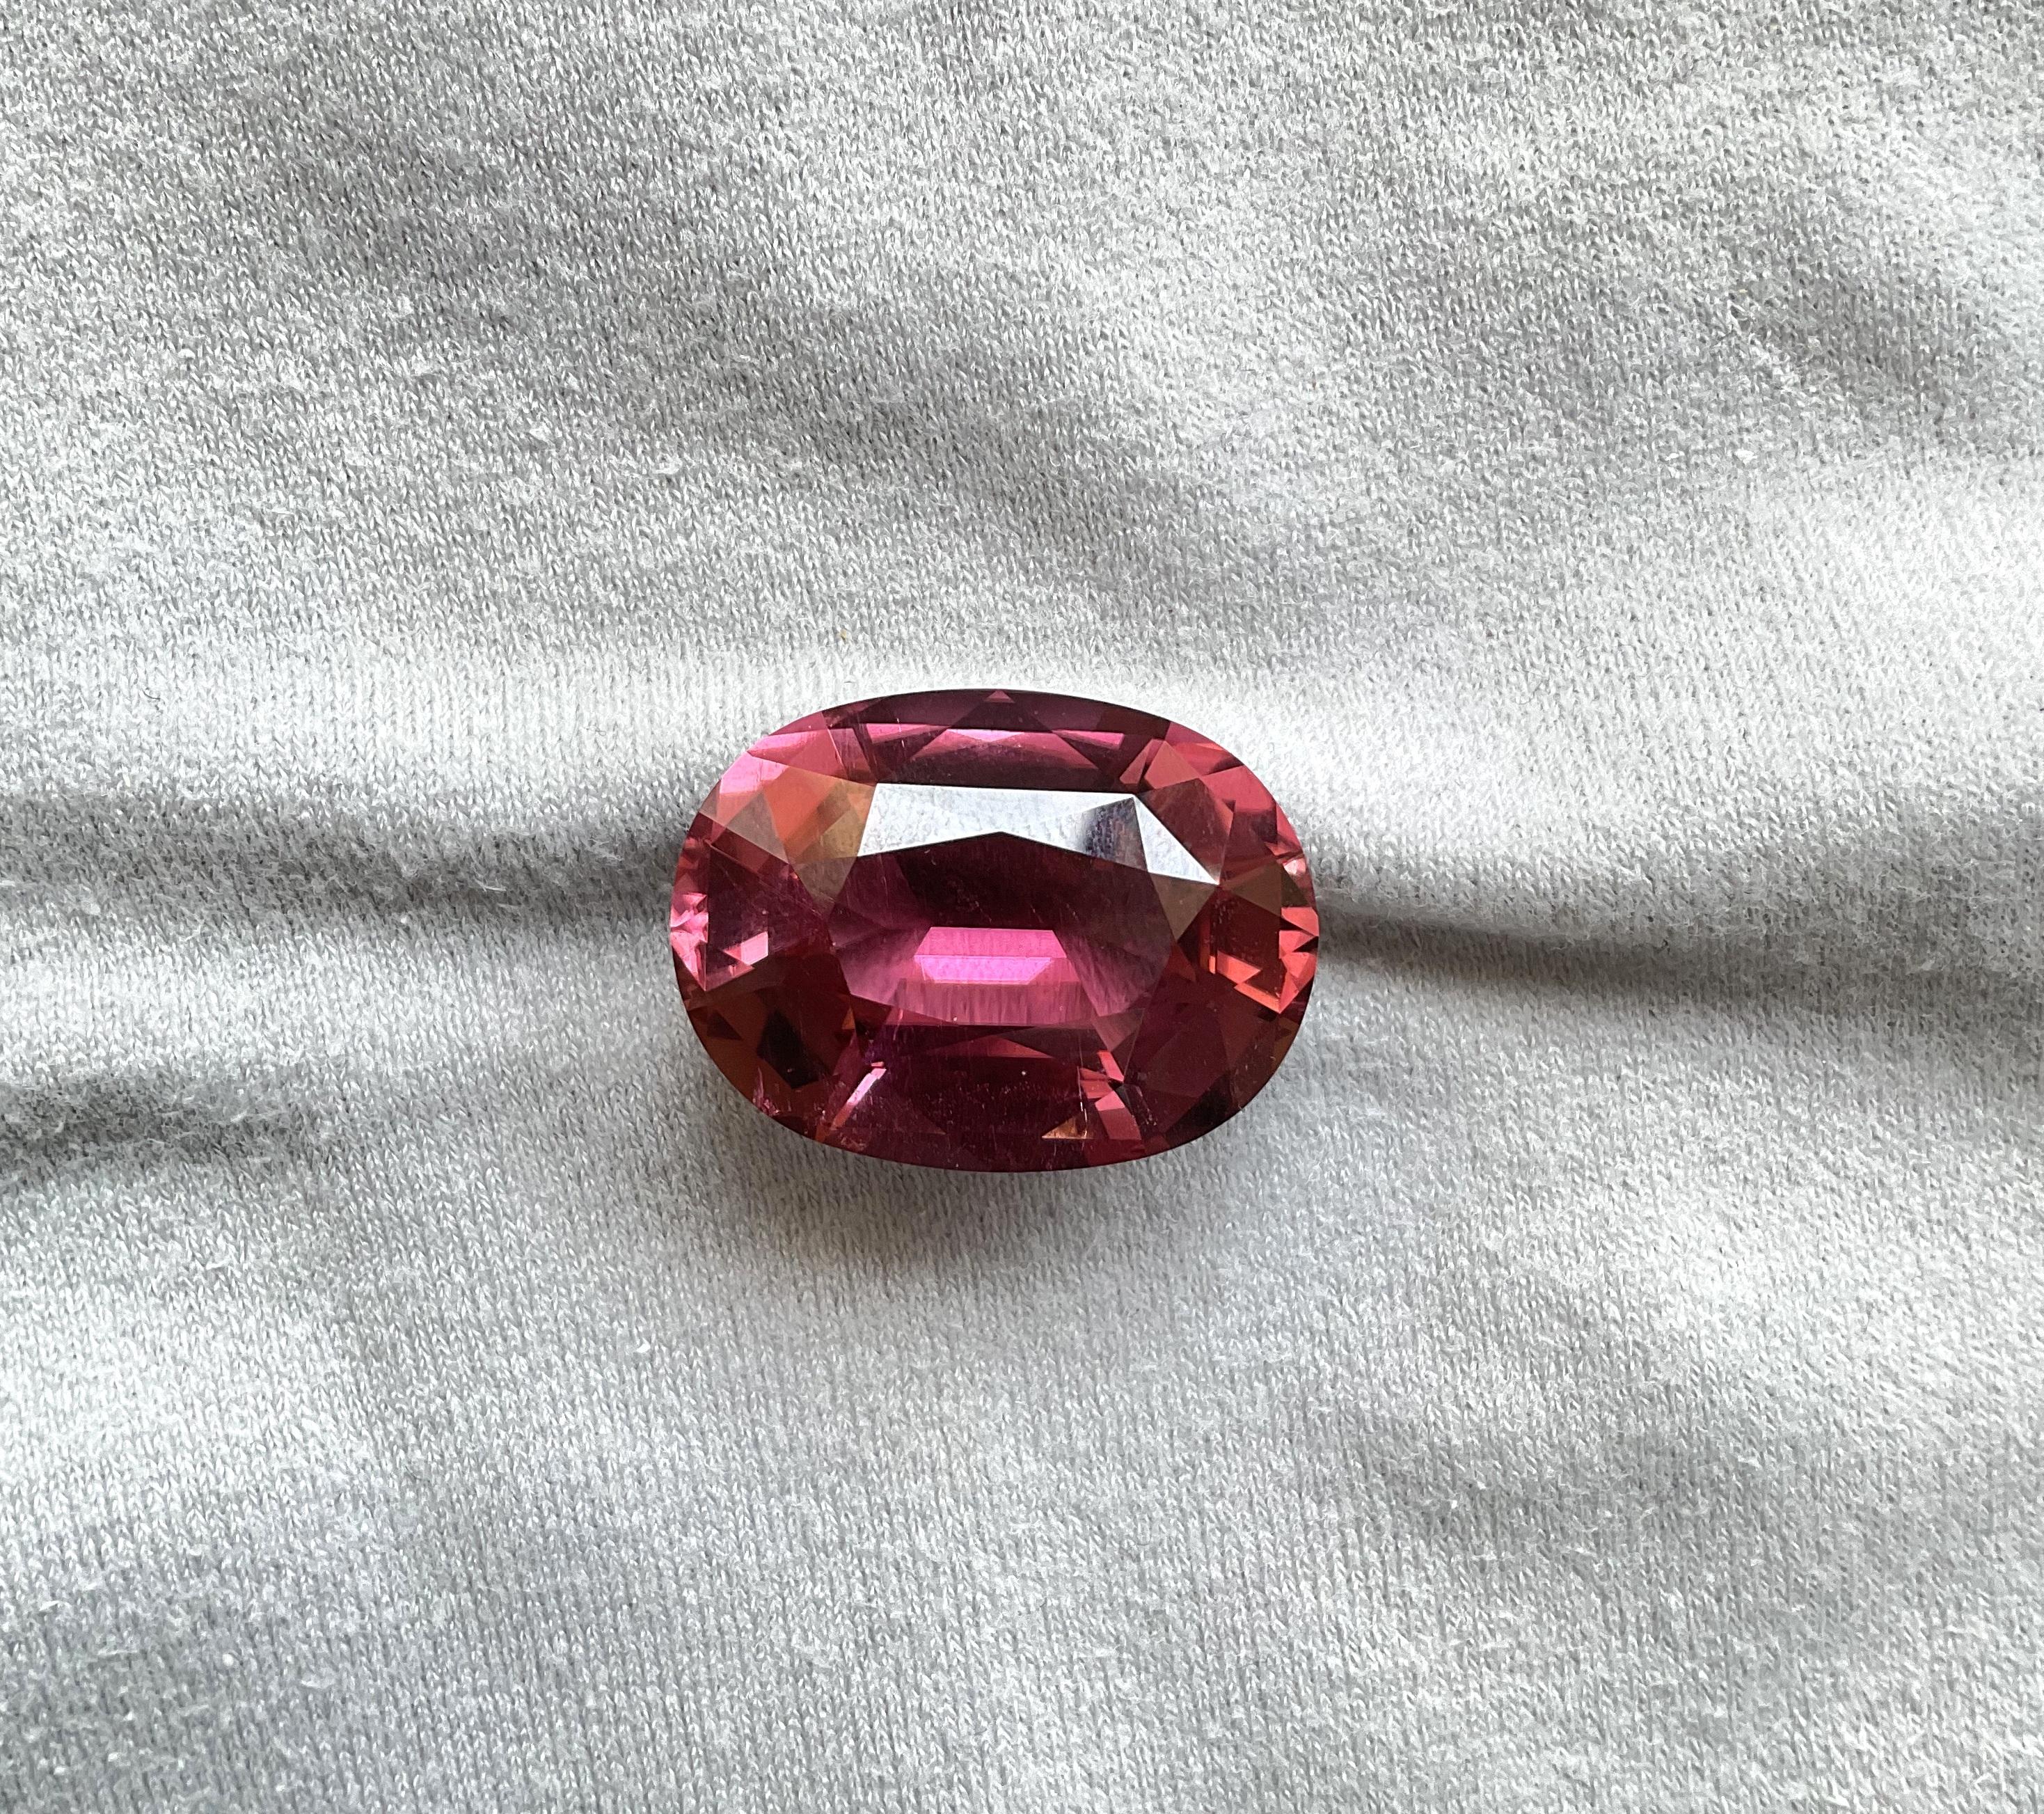 Taille ovale 47.94 Carats Top Quality Tourmaline Oval Cut Stone Fine Jewelry Natural Gemstone en vente